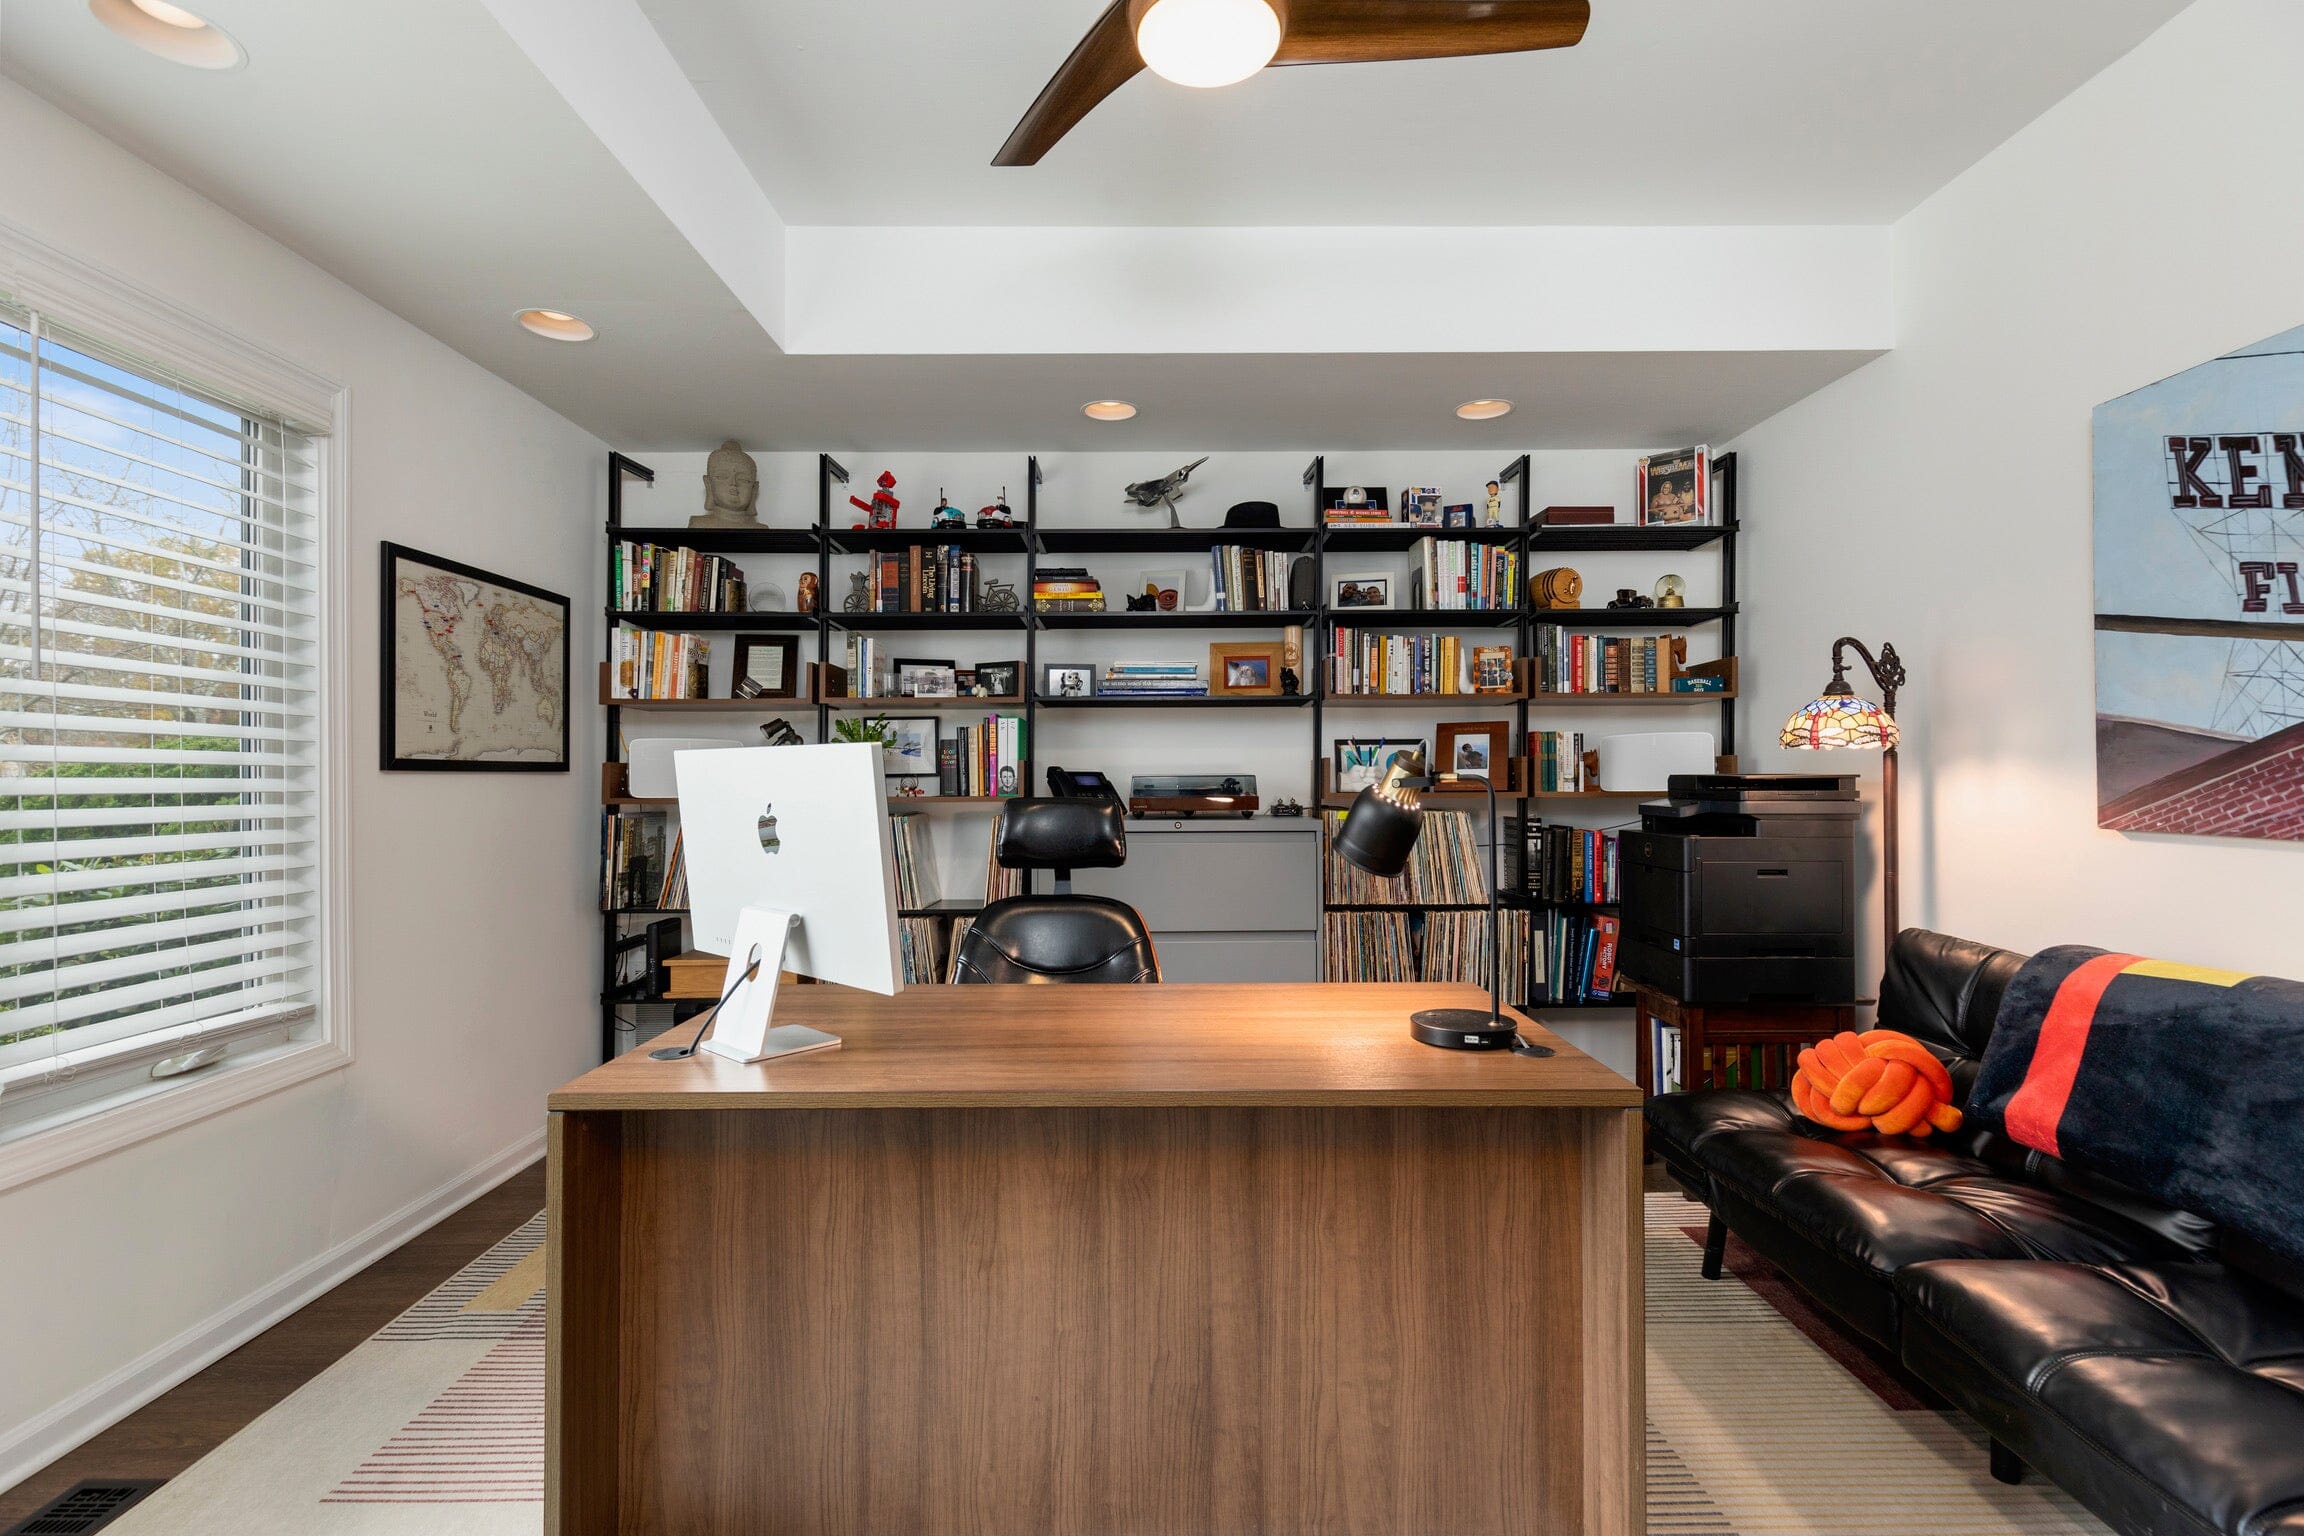 Return Customers Use Shelves for Their Home Office